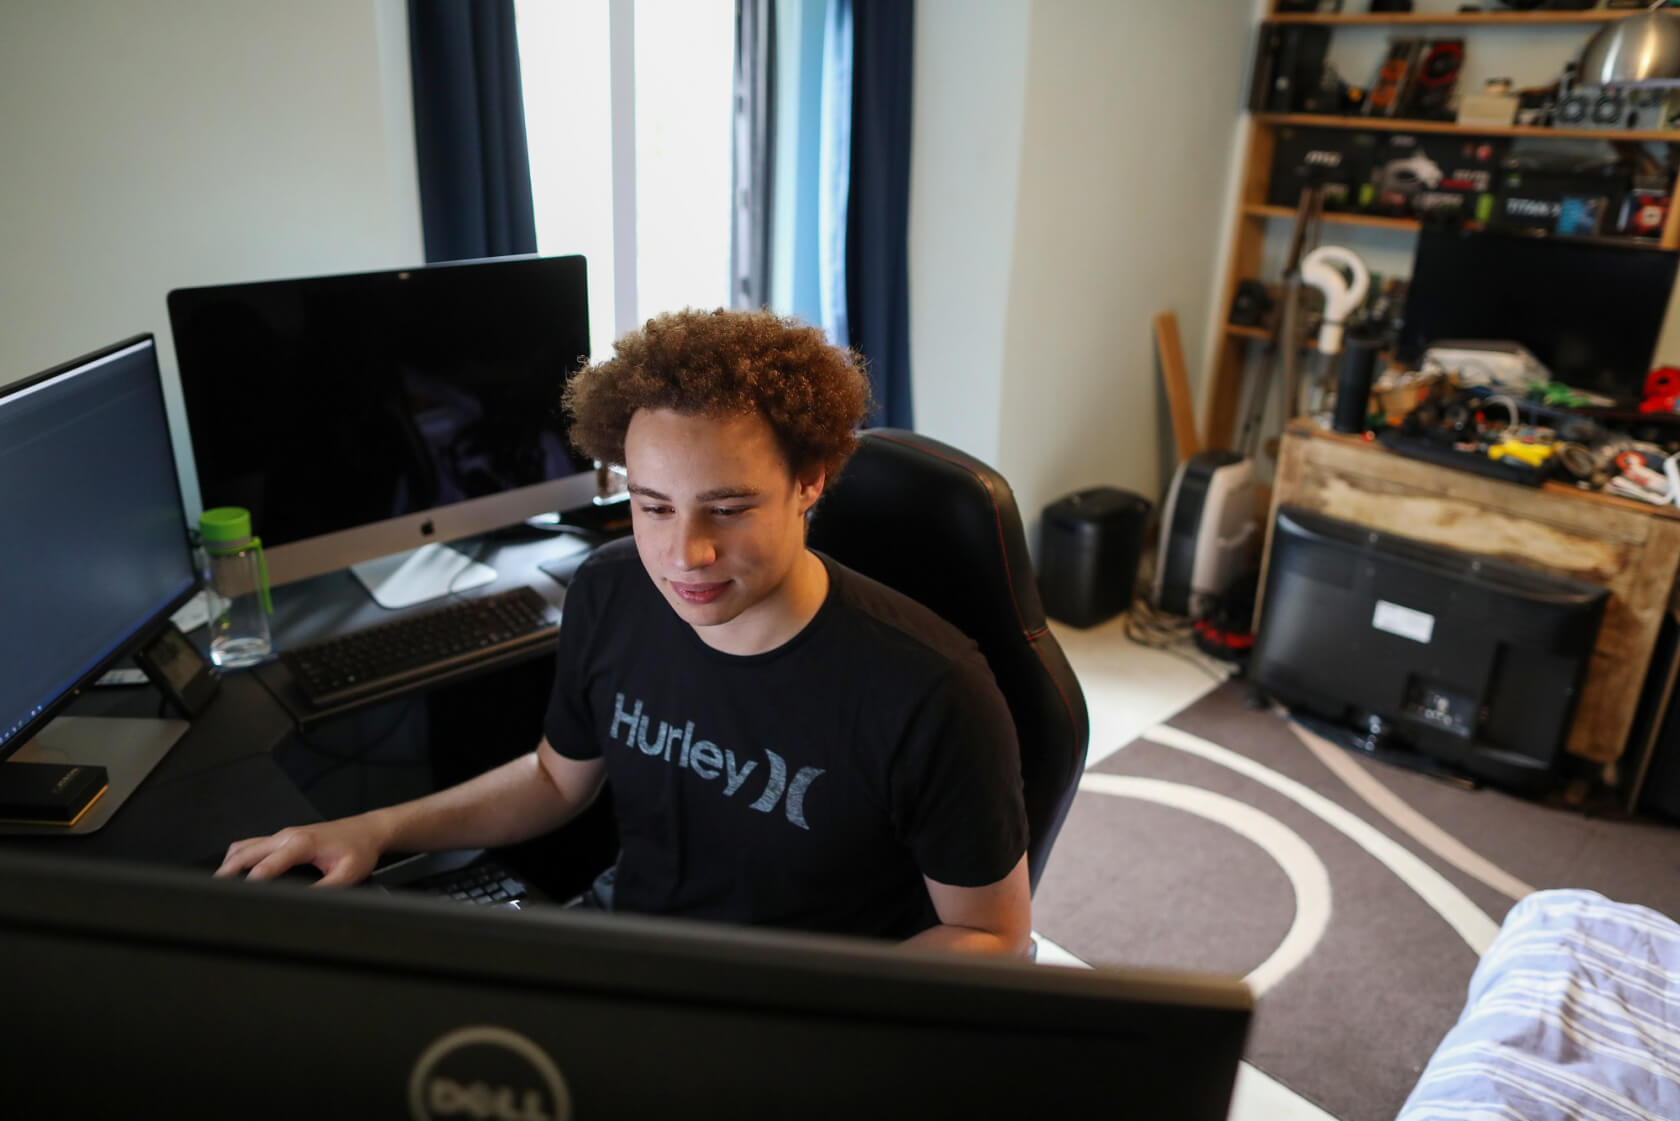 WannaCry hero Marcus Hutchins arrested by FBI over allegations he created Kronos banking Trojan